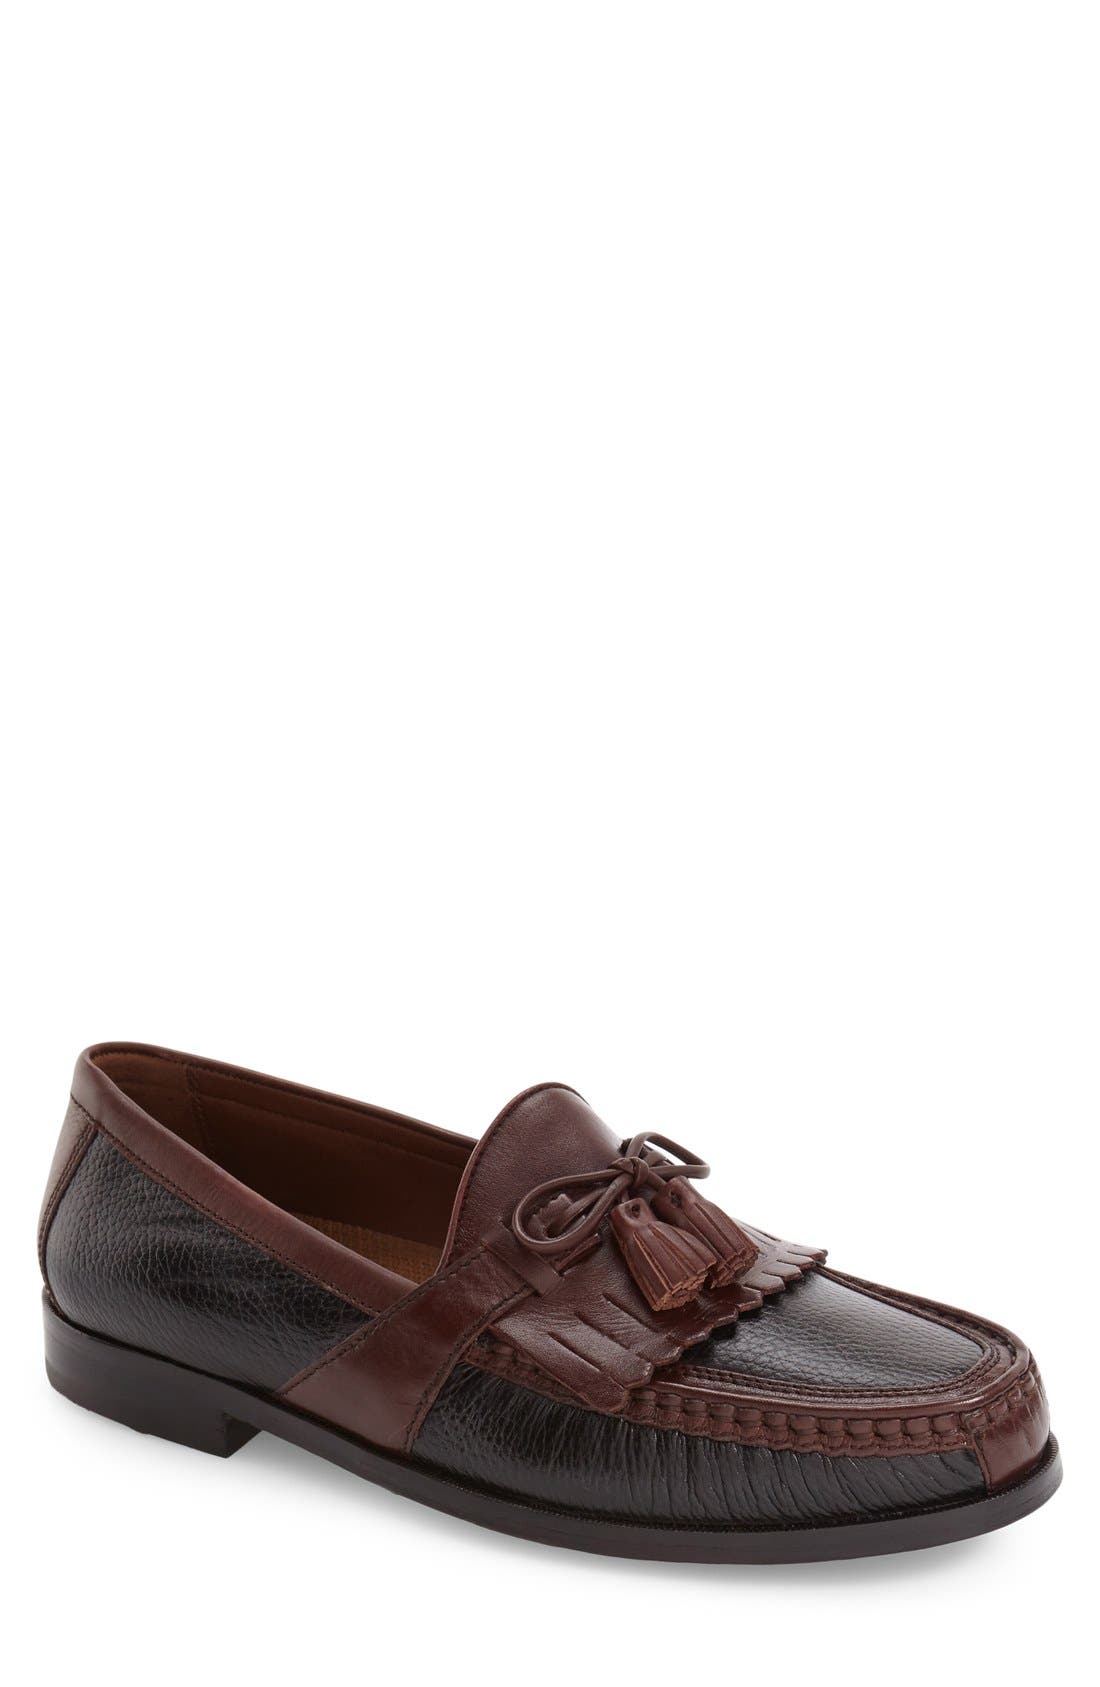 johnston and murphy black loafers